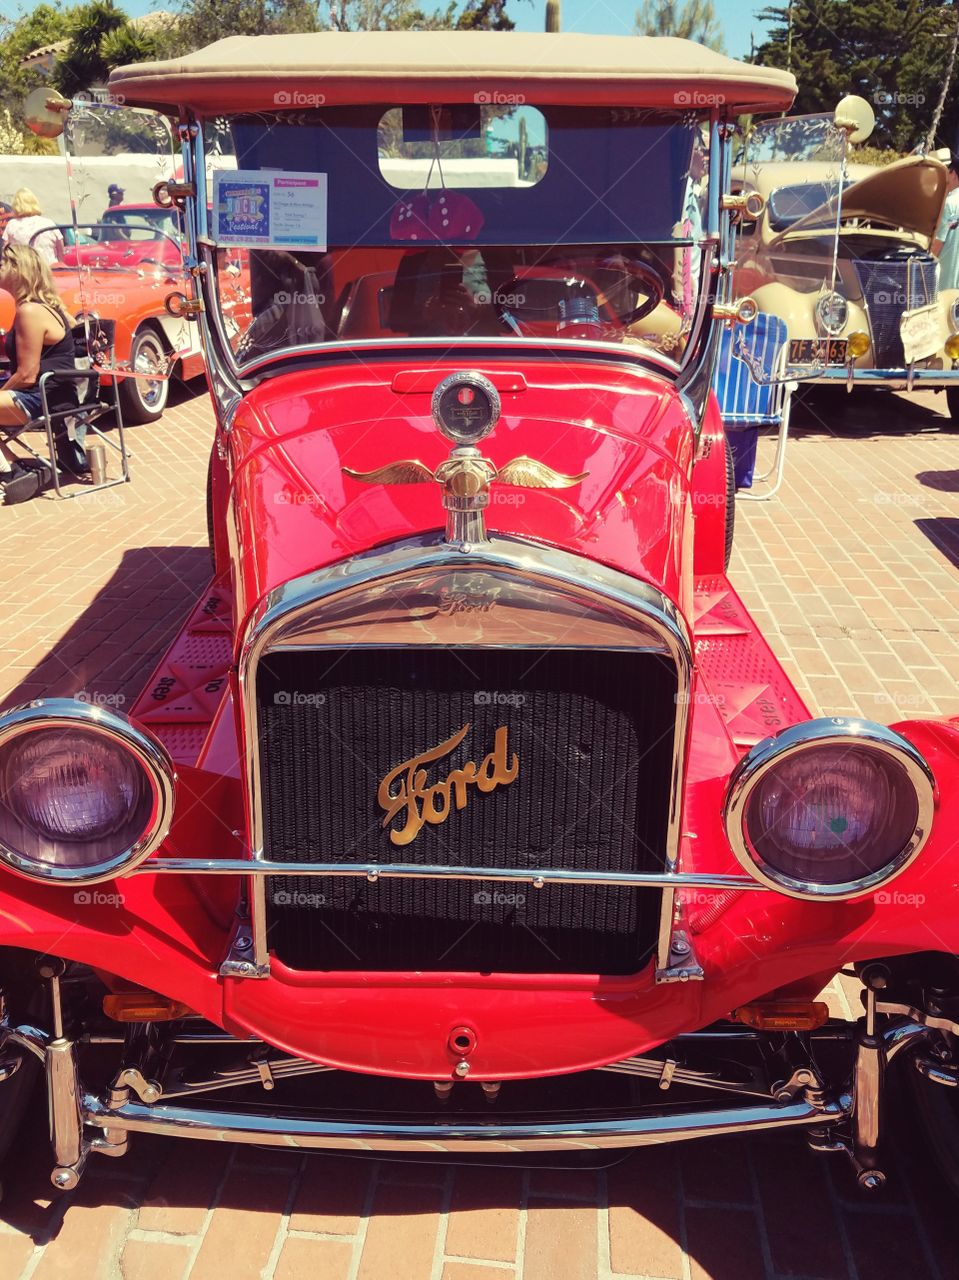 Retro Old Vintage Red Hotrod Ford Car at Carshow